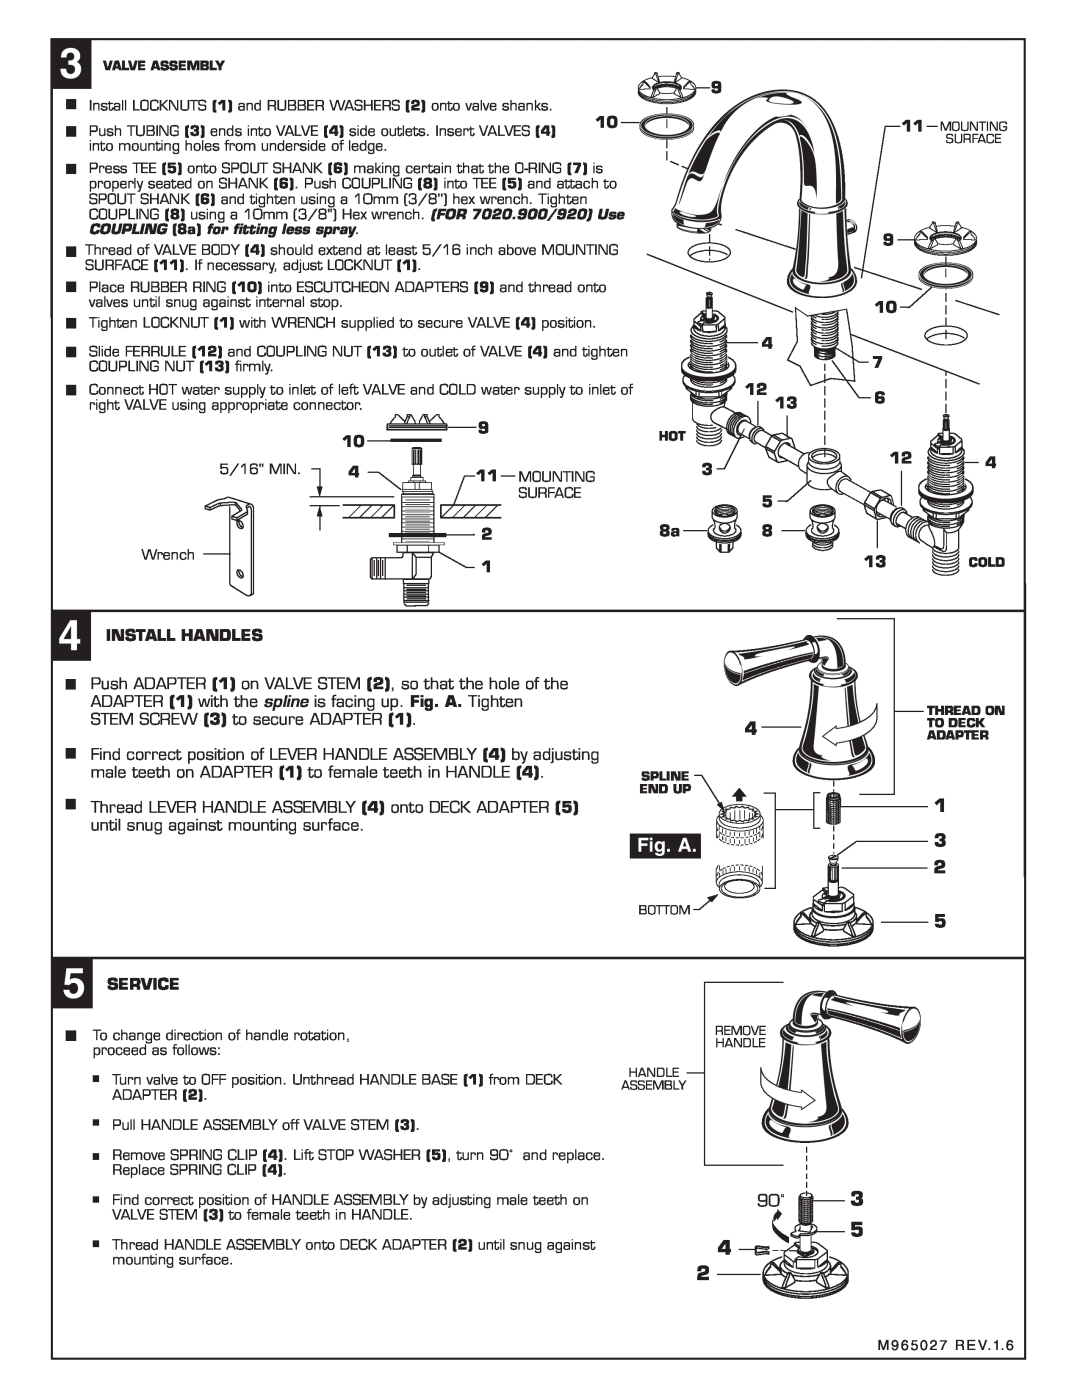 American Standard 7420.921, 7420.901 installation instructions Fig. A 